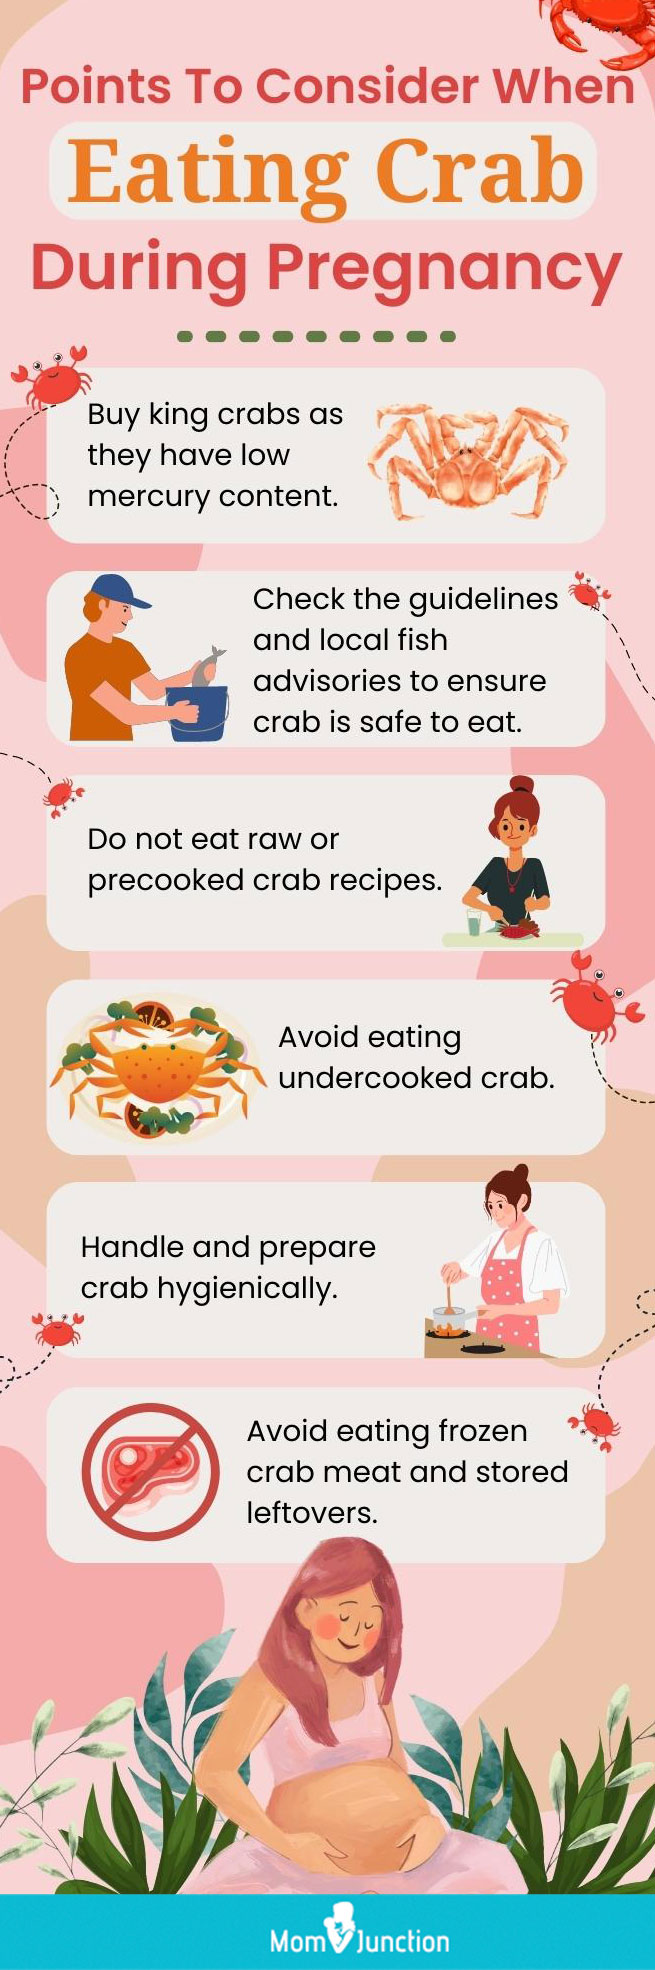 points to consider when eating crab during pregnancy [infographic]